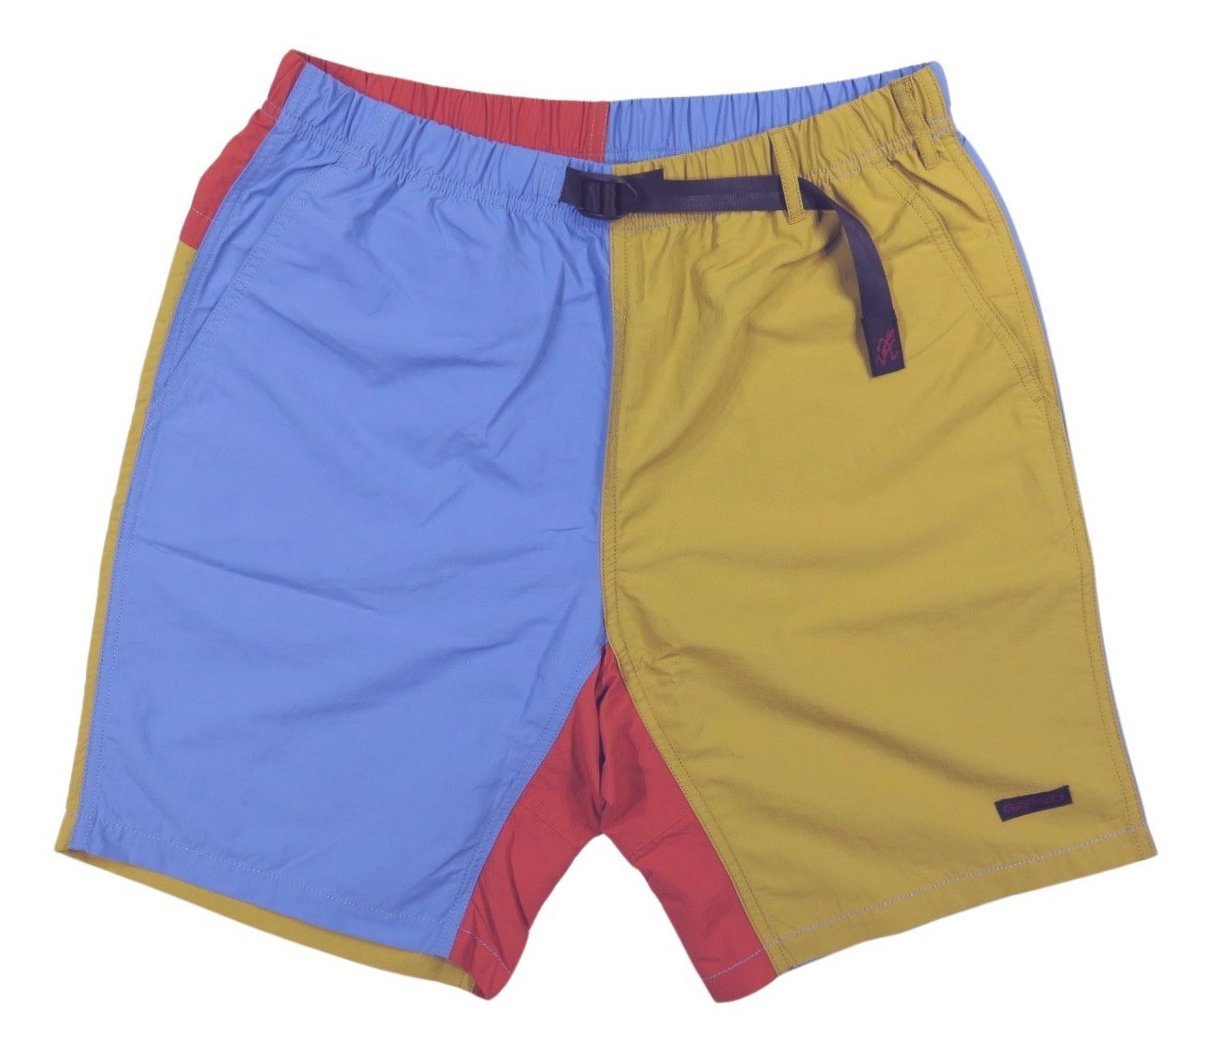 GRAMICCI SHELL PACKABLE SHORTS クレイジーパターン ナイロンシェル パ...